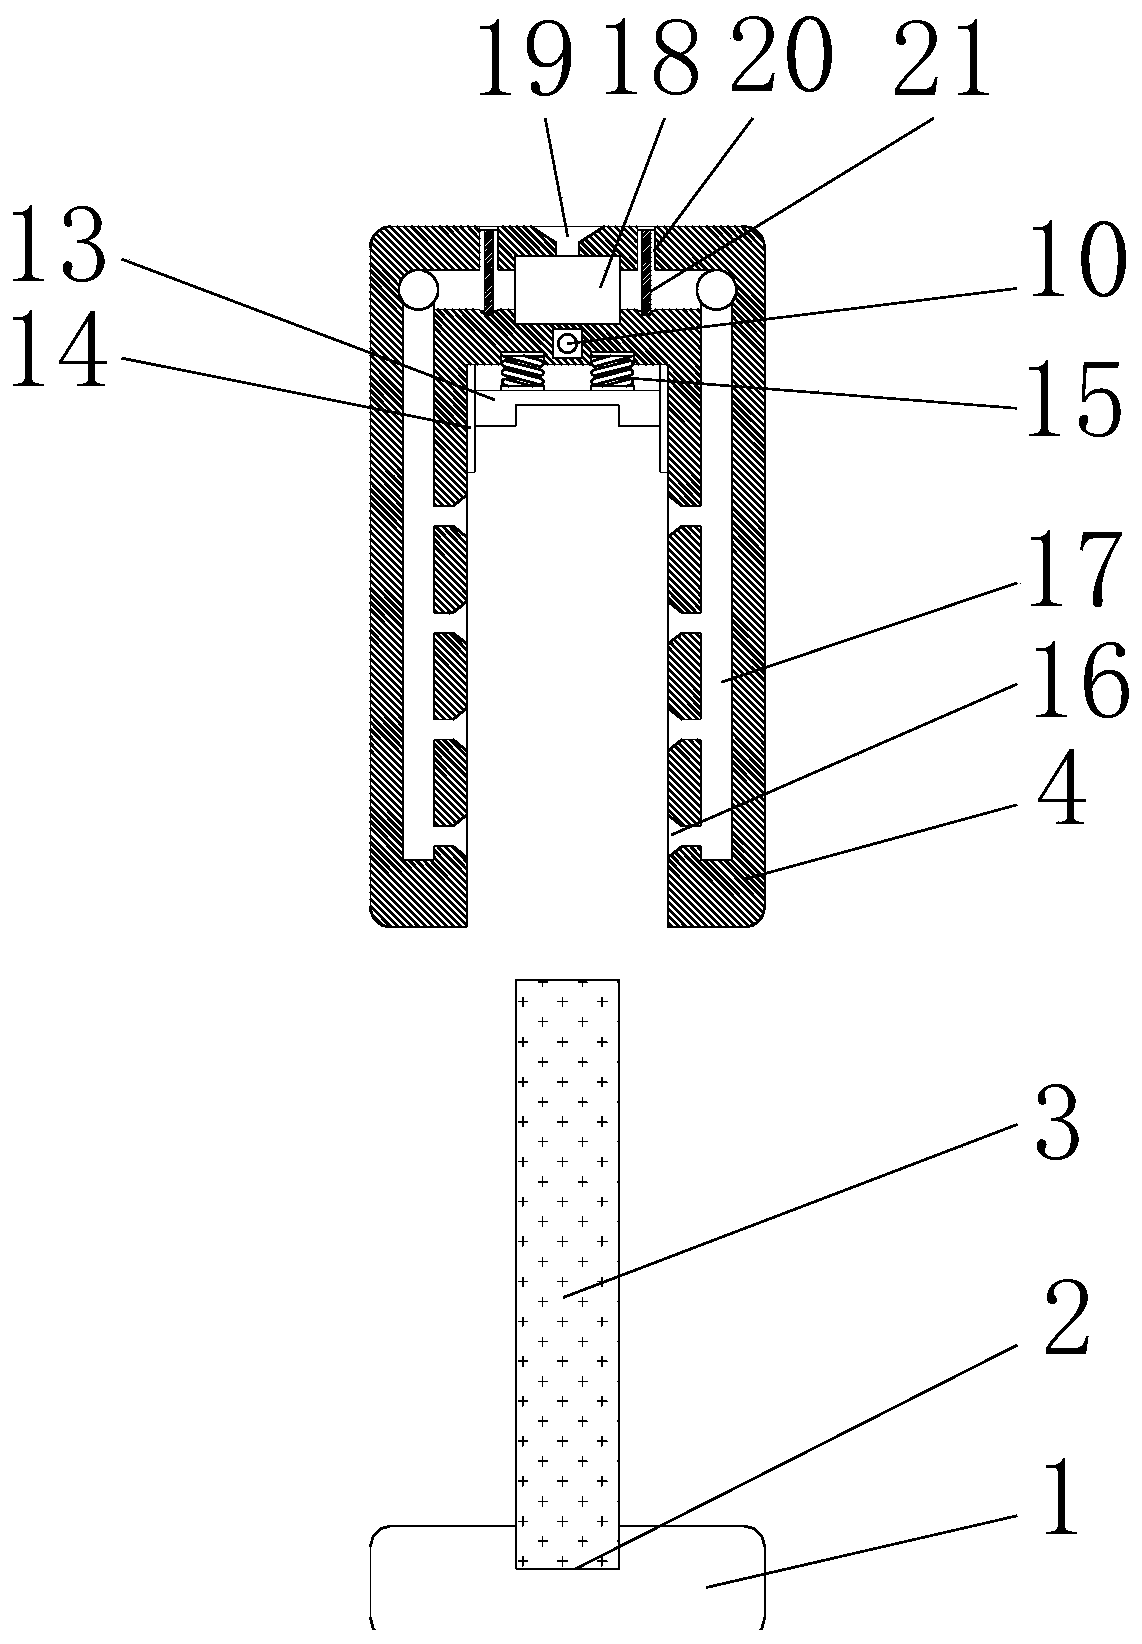 Computer memory bank mounting structure